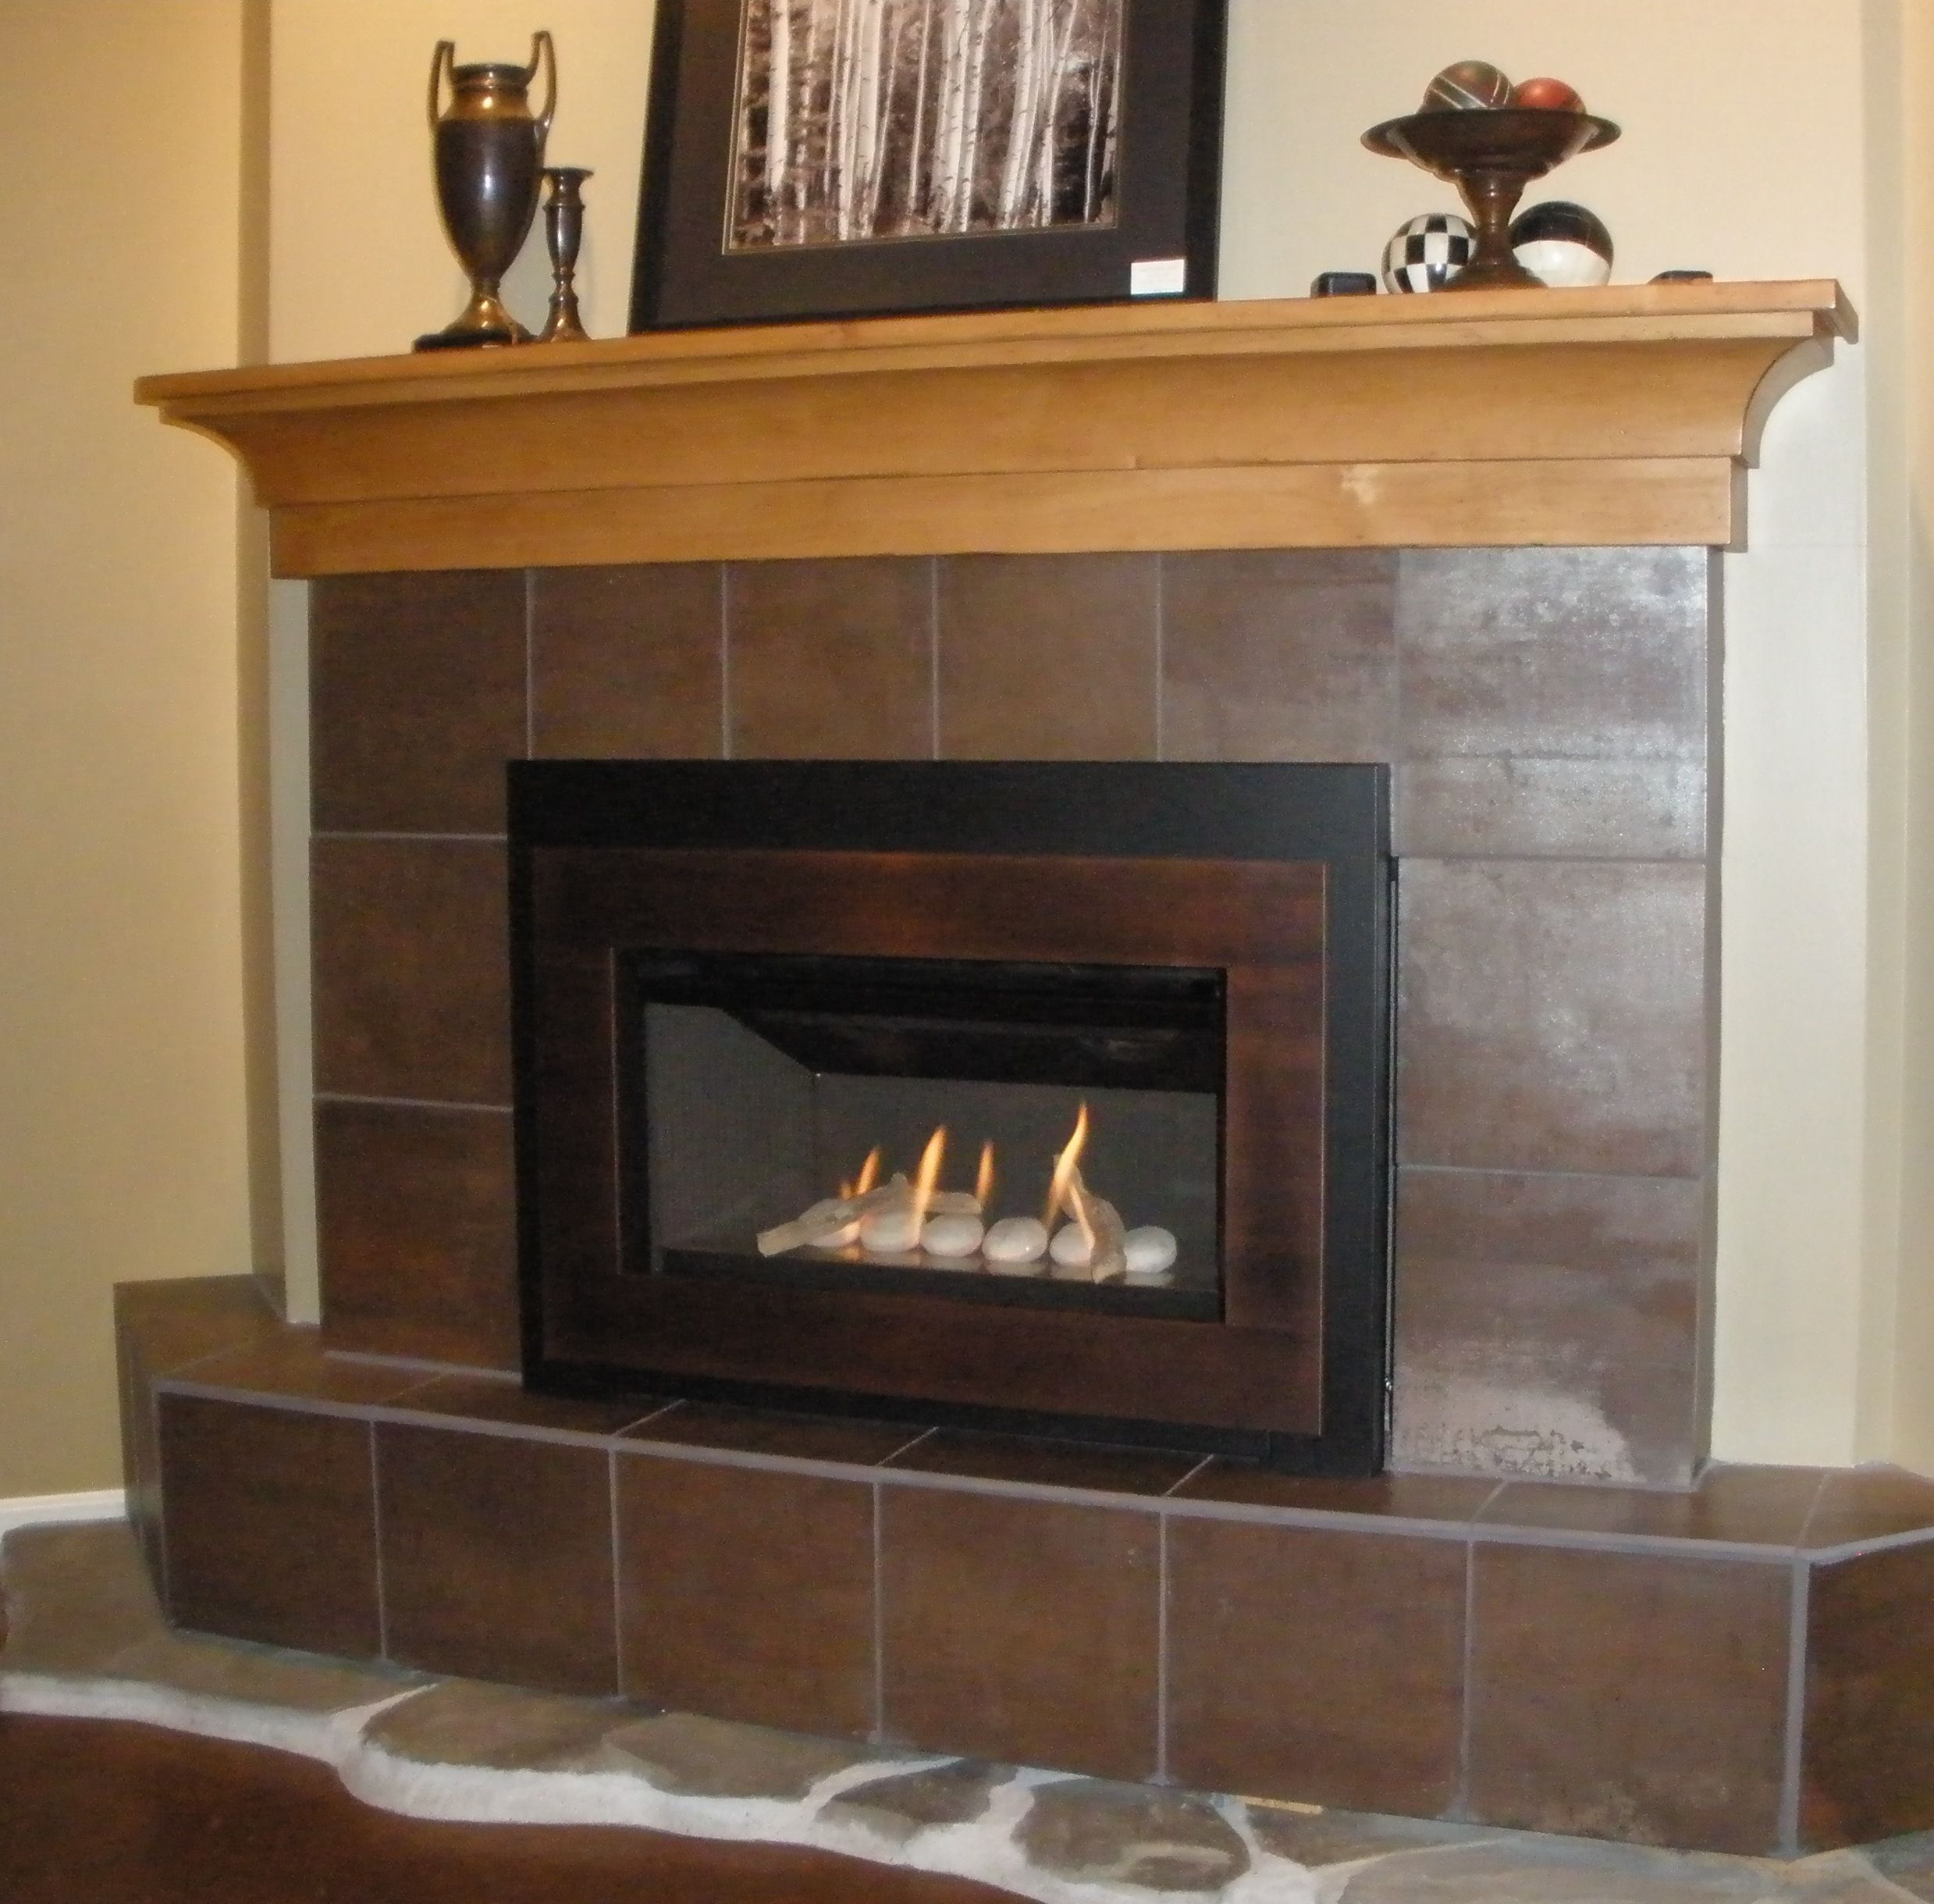 Heat and Glo Fireplace Insert Fresh Pin On Valor Radiant Gas Fireplaces Midwest Dealer